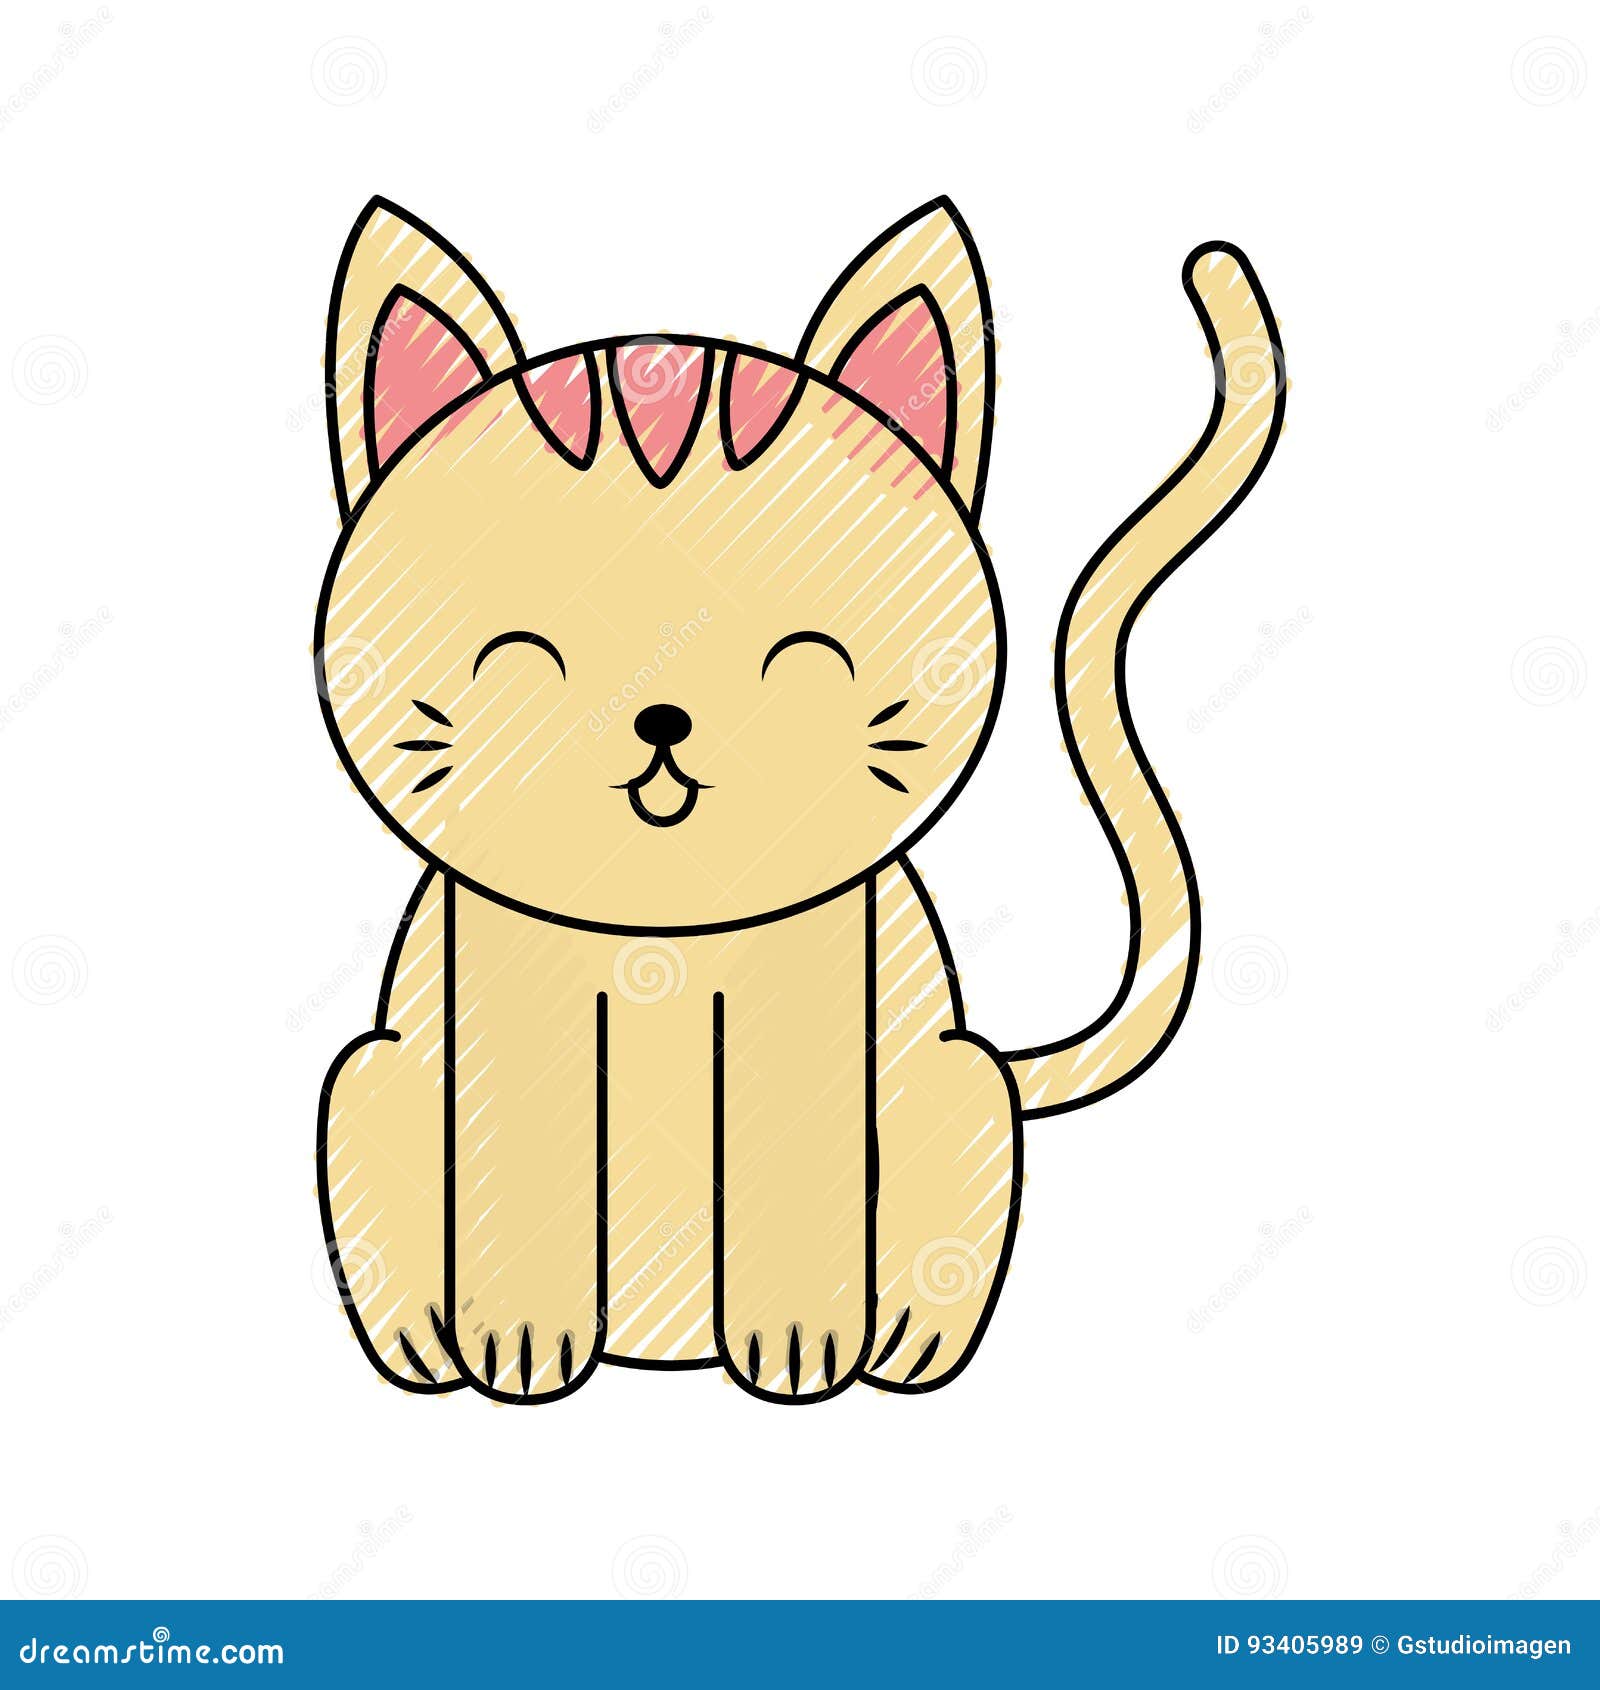 Cute scribble cat cartoon stock vector. Illustration of whiskers - 93405989